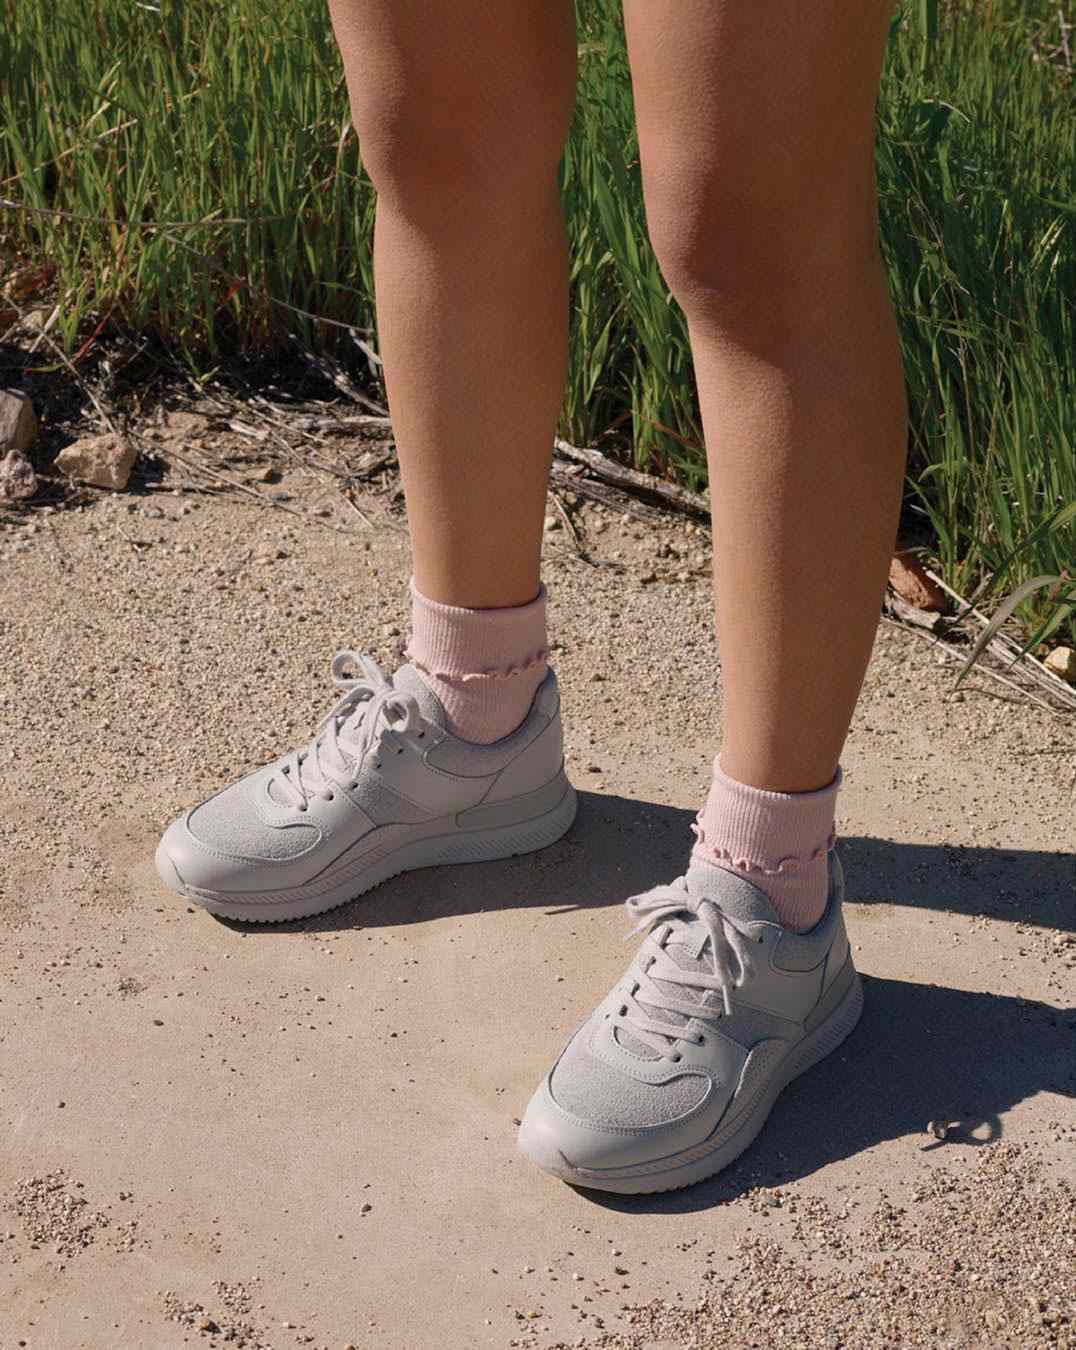 Everlane's New Tread Sneakers Have 